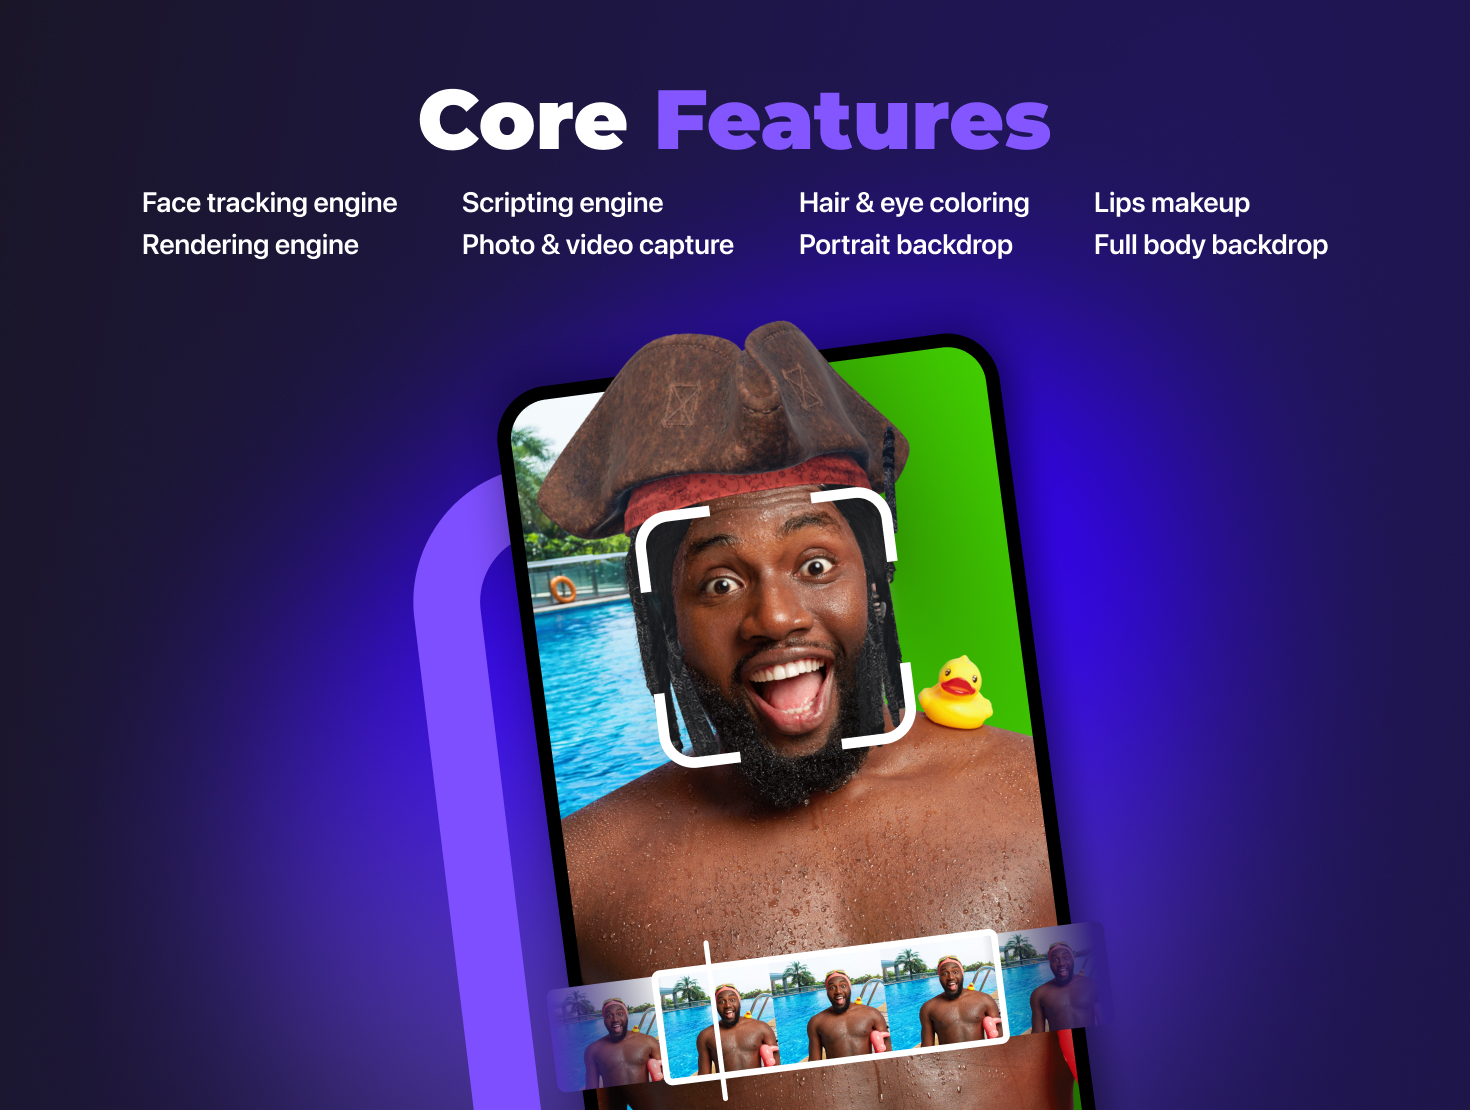 Core features of Banuba augmented reality SDK (Face Tracking Engine, Rendering Engine, Scripting Engine, Photo & Video Capture, Hair & eye Coloring, Portrait Backdrop, Lips Makeup, Full body Backdrop)